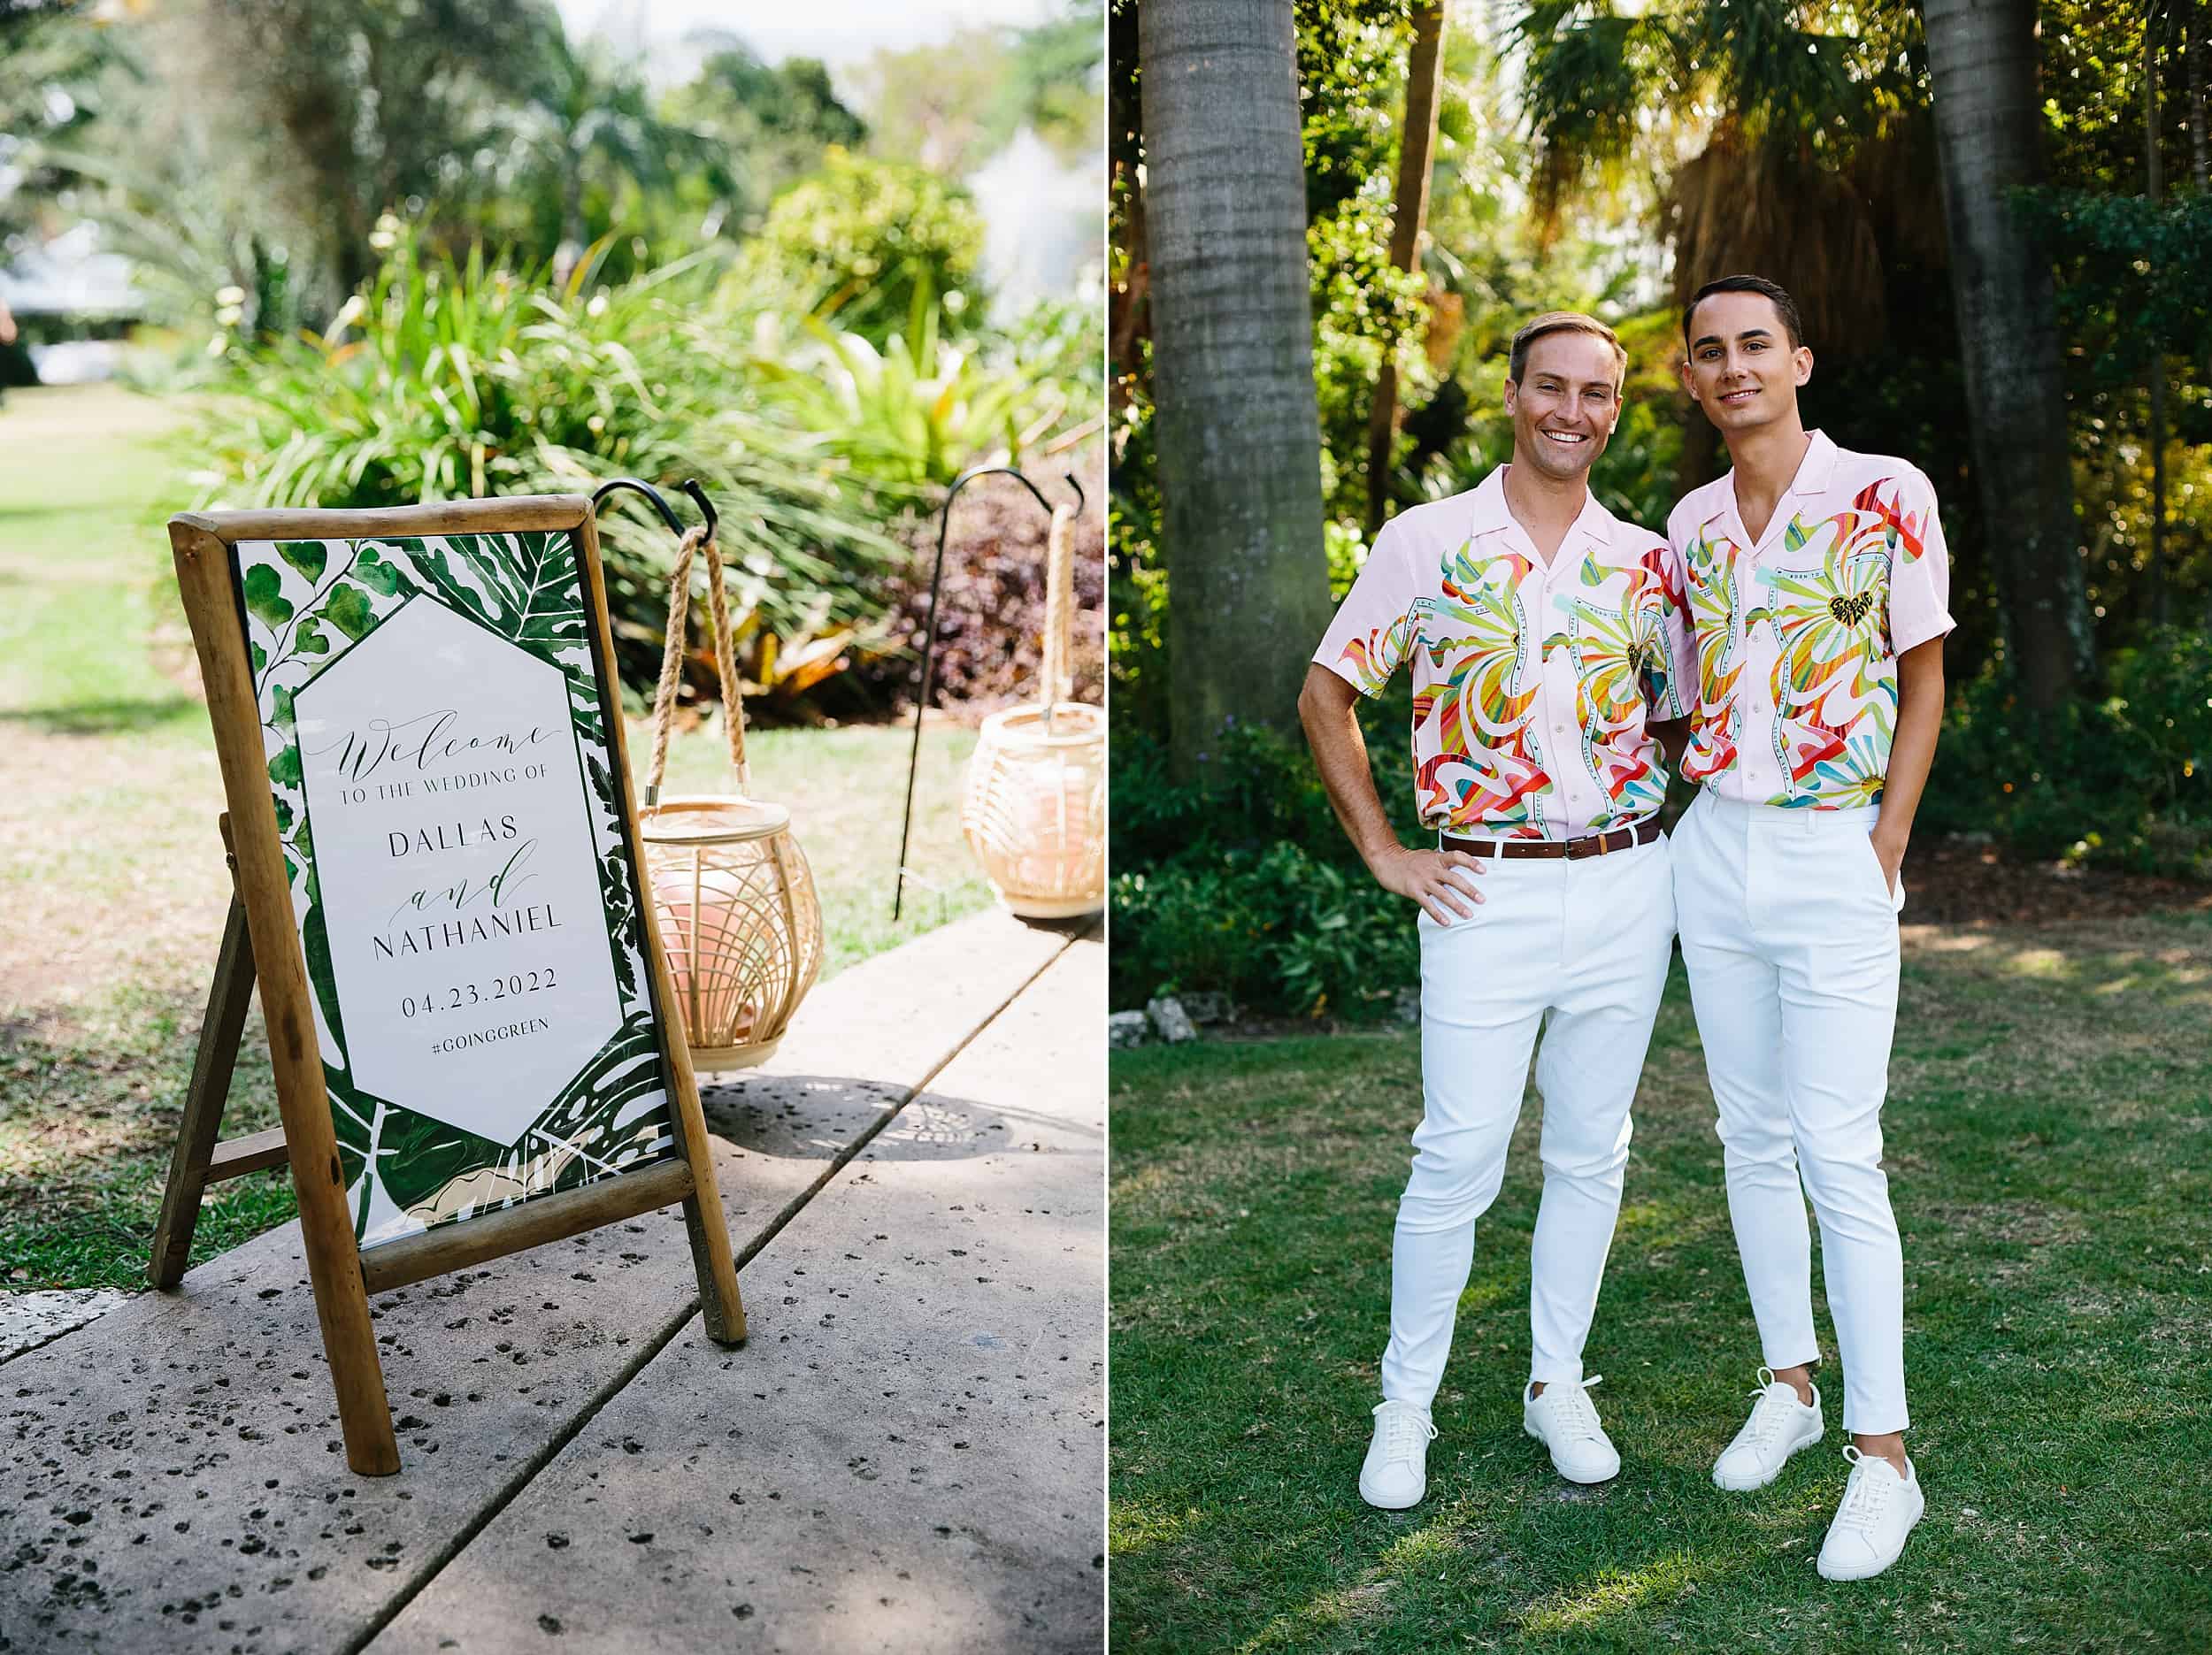 Wedding Welcome Sign and couple wearing a casual and colorful outfit. Perfect for a spring or summer celebration